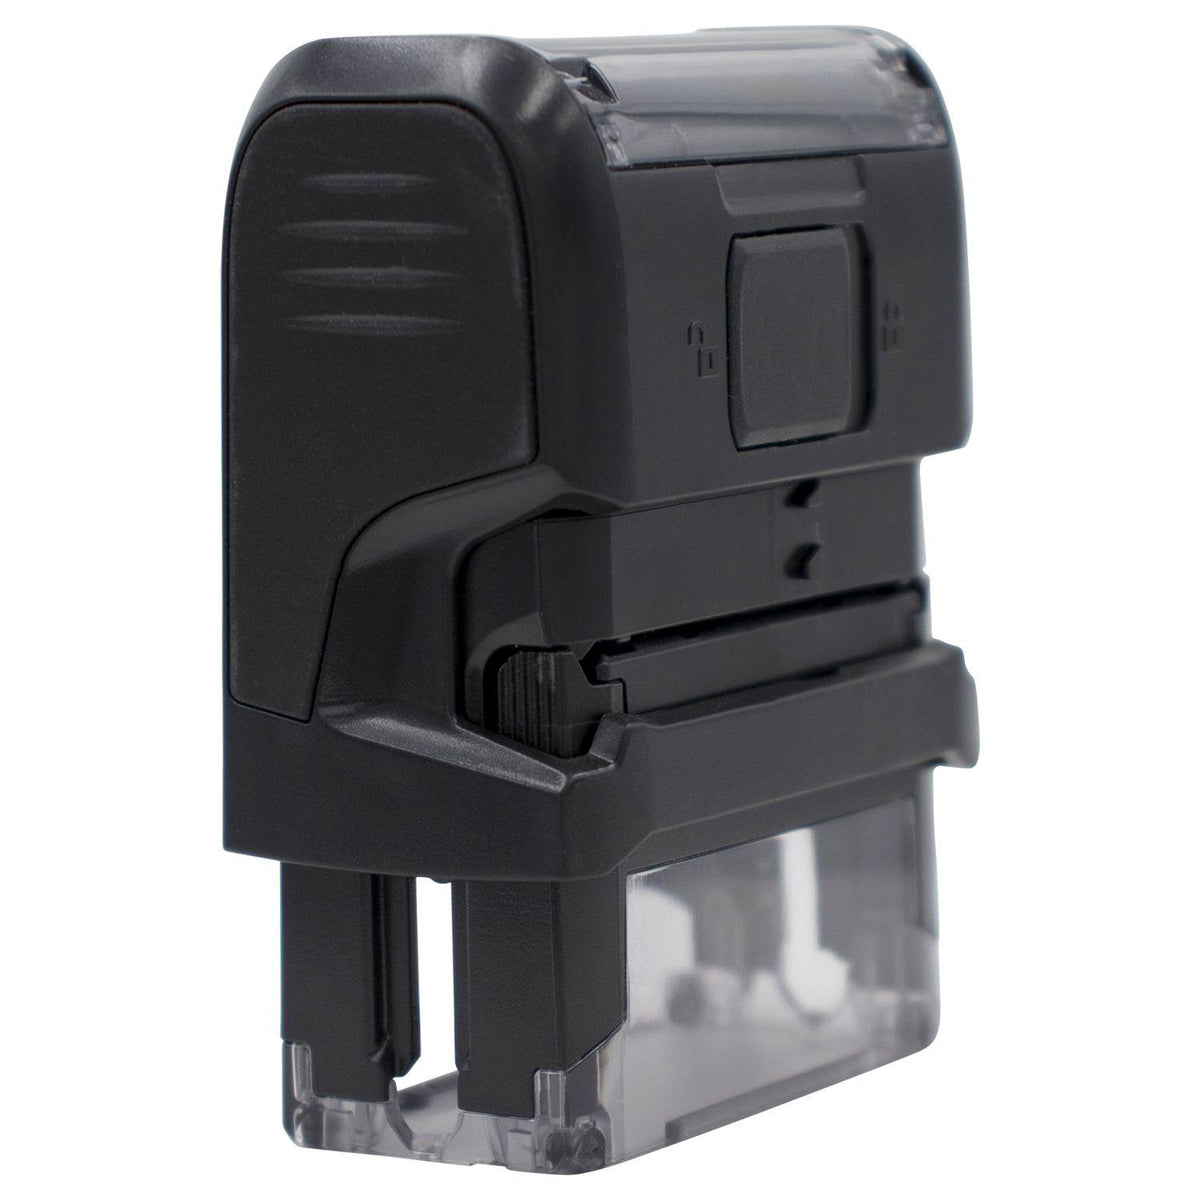 Self Inking Copy For Your Information Stamp - Engineer Seal Stamps - Brand_Trodat, Impression Size_Small, Stamp Type_Self-Inking Stamp, Type of Use_Office